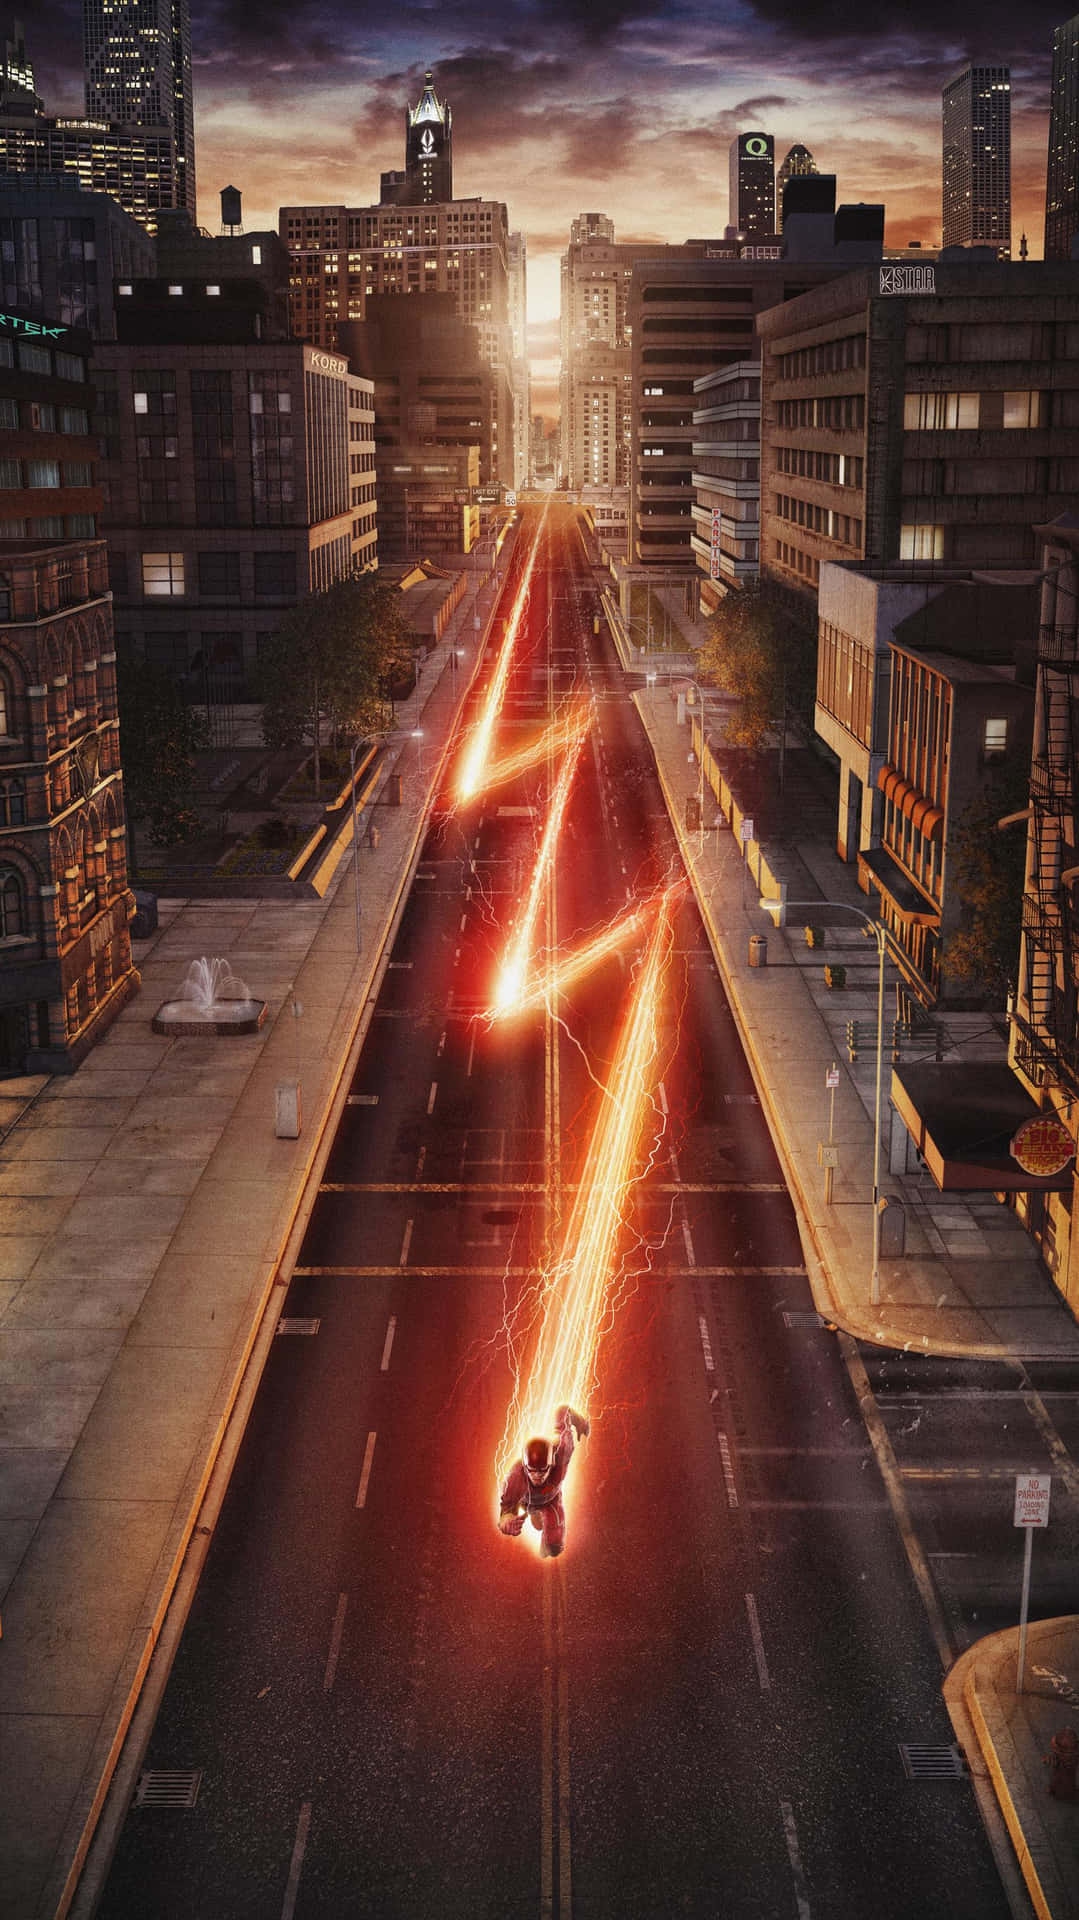 The Flash in Action